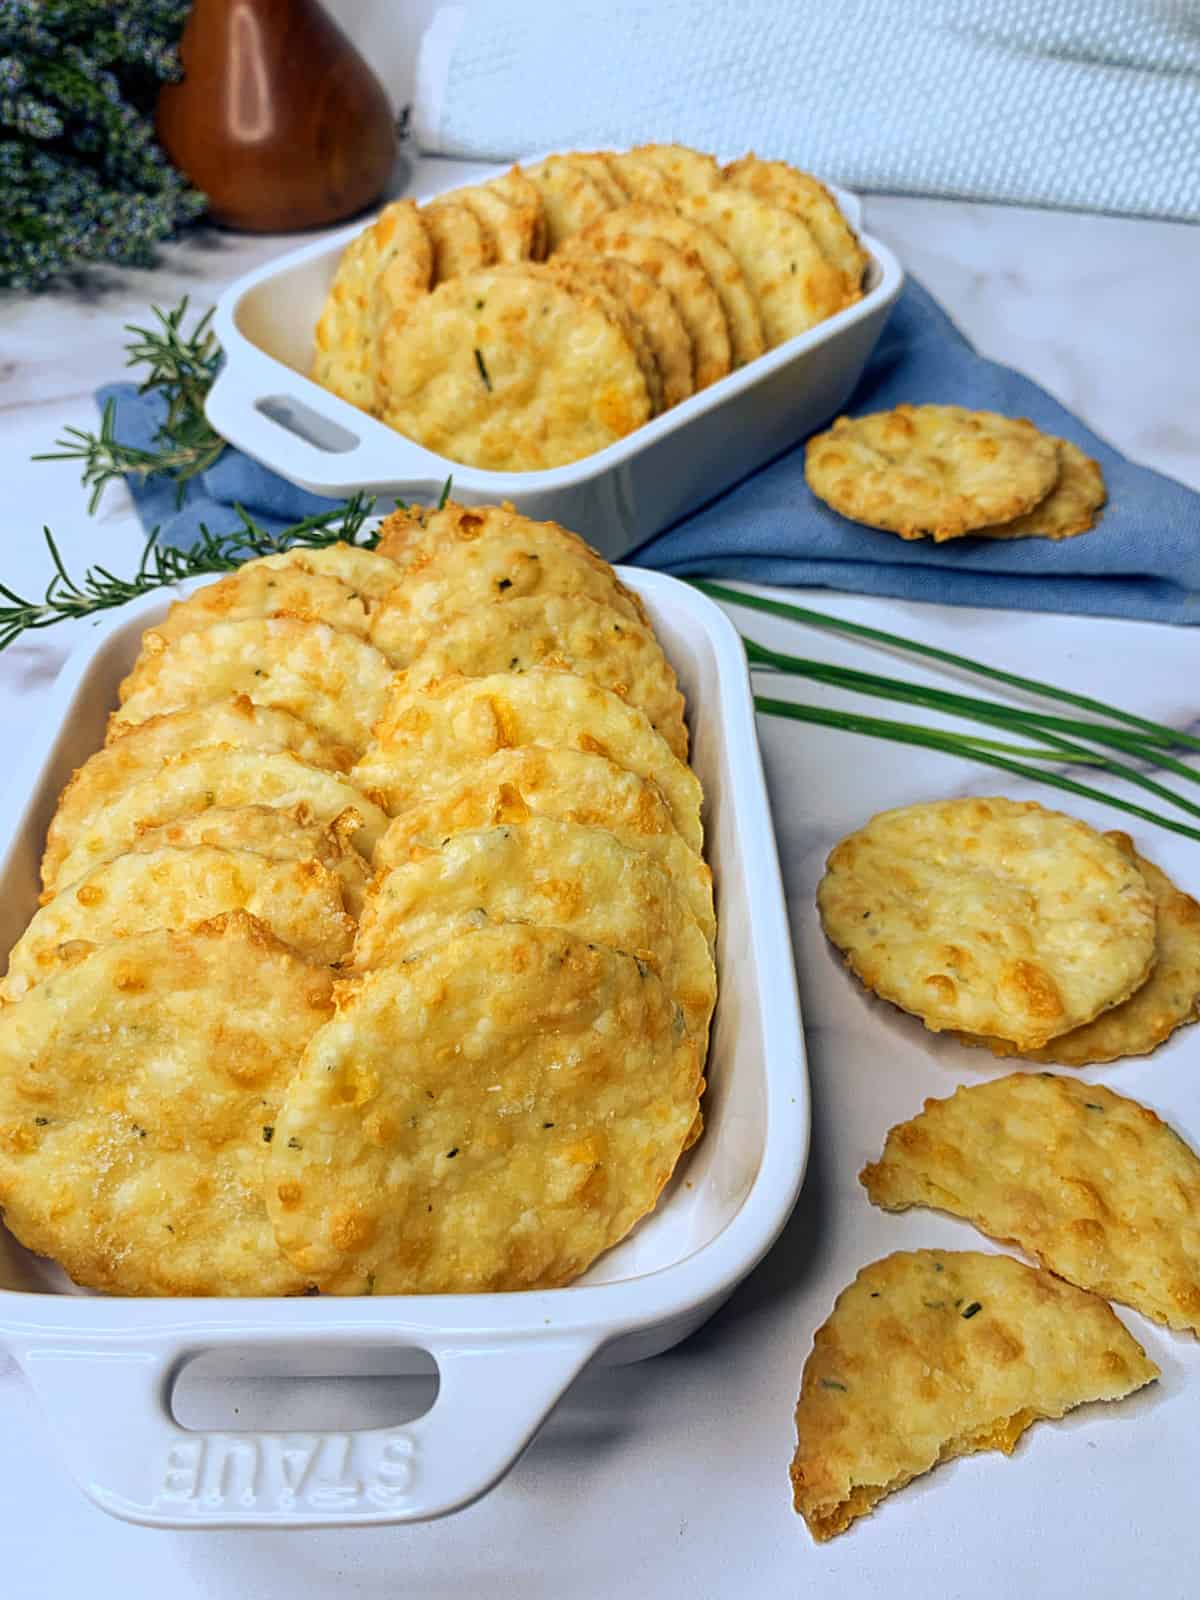 Cheddar cheese crackers in a white Staub casserole dish.